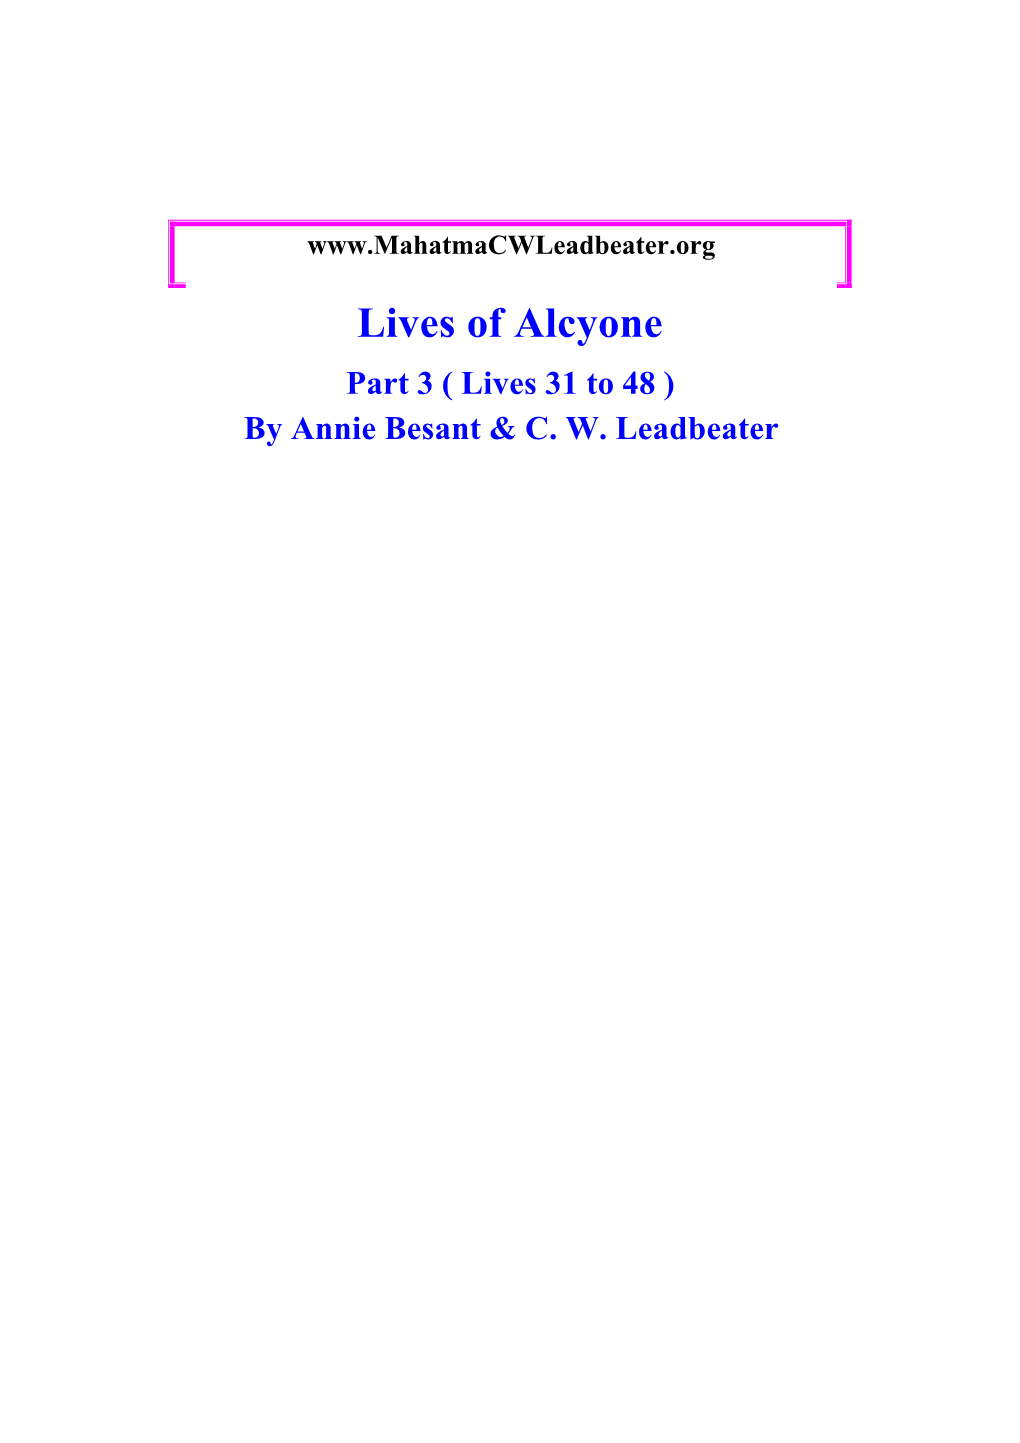 Lives of Alcyone Part 3 ( Lives 31 to 48 ) by Annie Besant & C